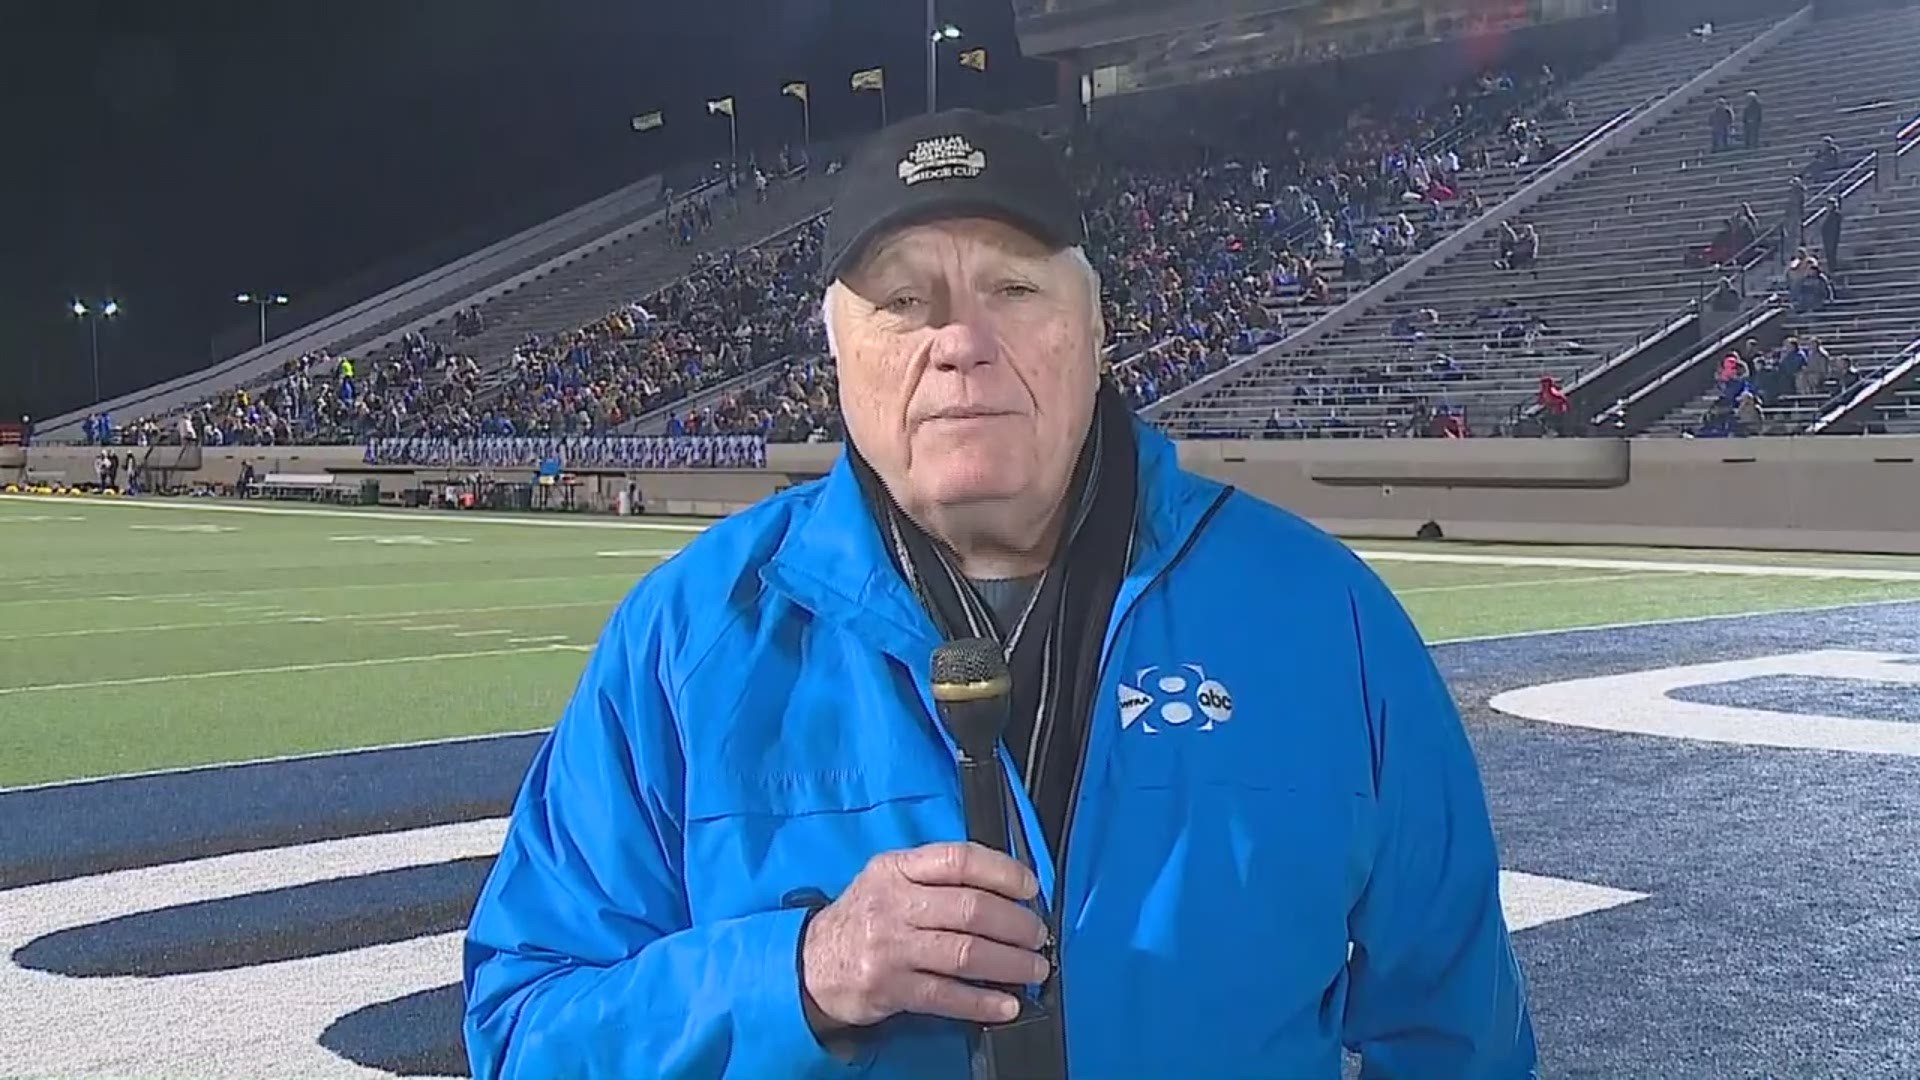 #GAMEOFTHEWEEK: It's Friday night and Dale Hansen is at our game of the week: Brock vs Pilot Point.